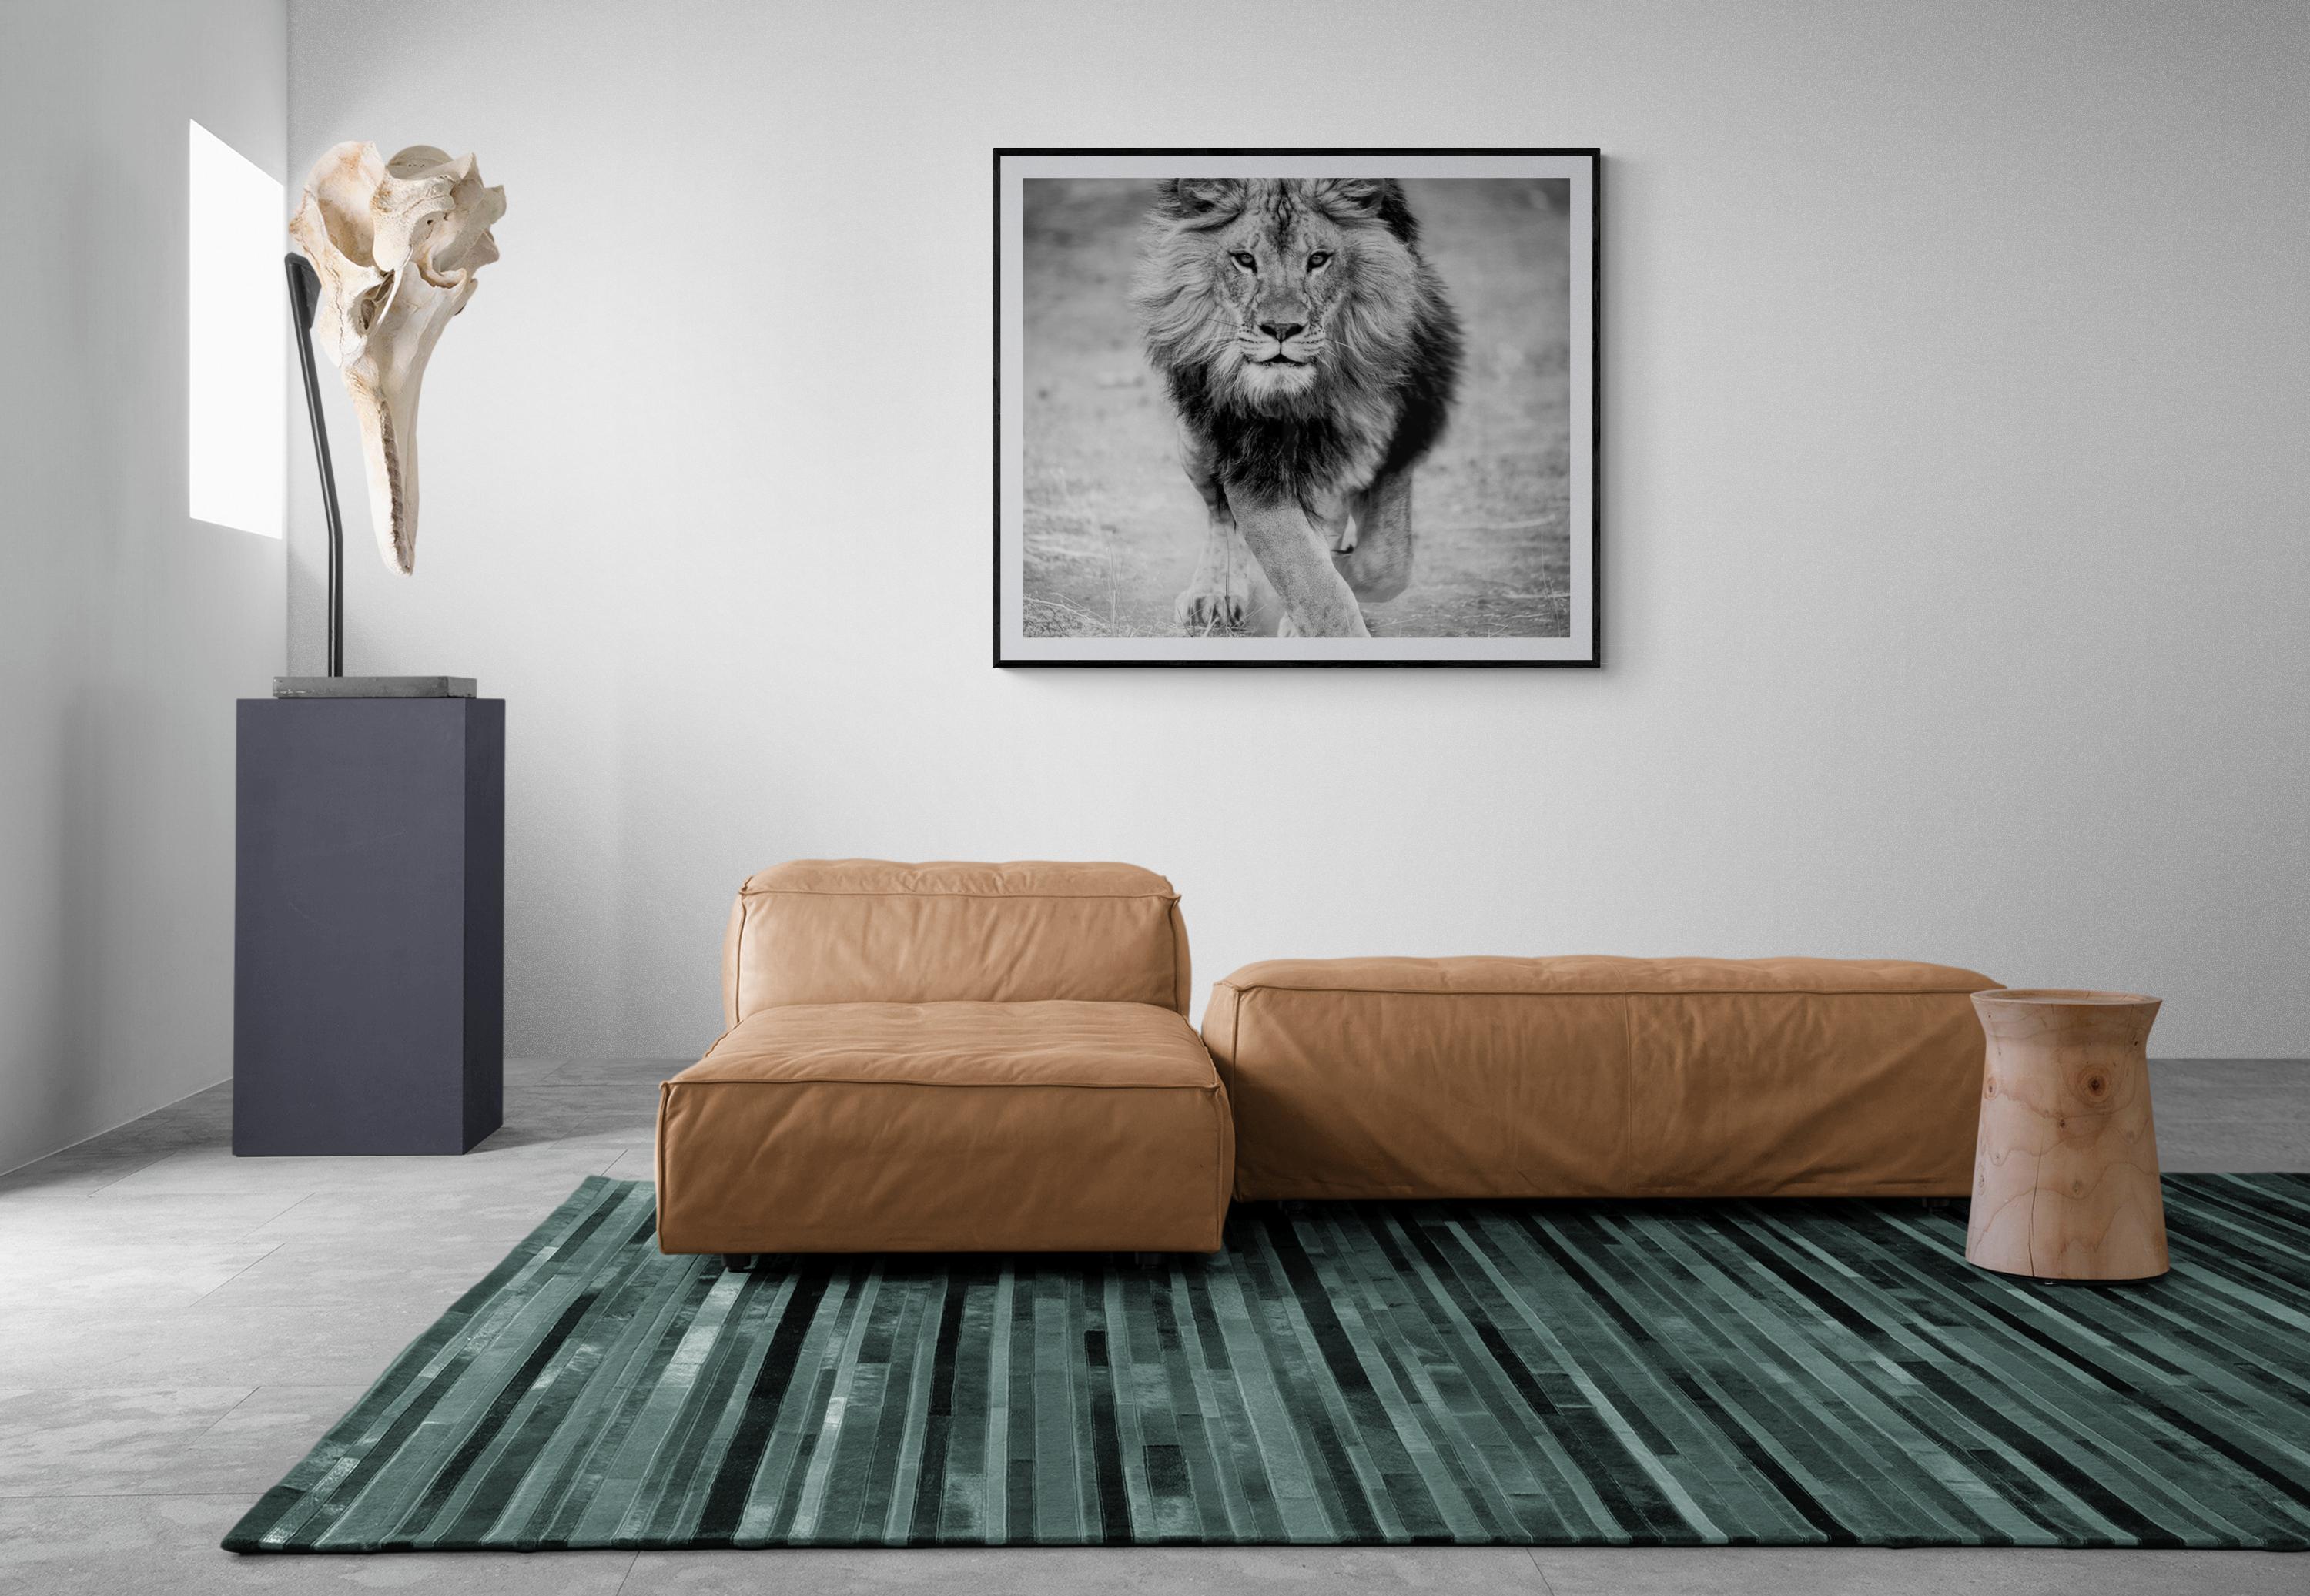 Panthera Leo - 30x50 Black and White Photography, Lion Photograph Print Africa  6